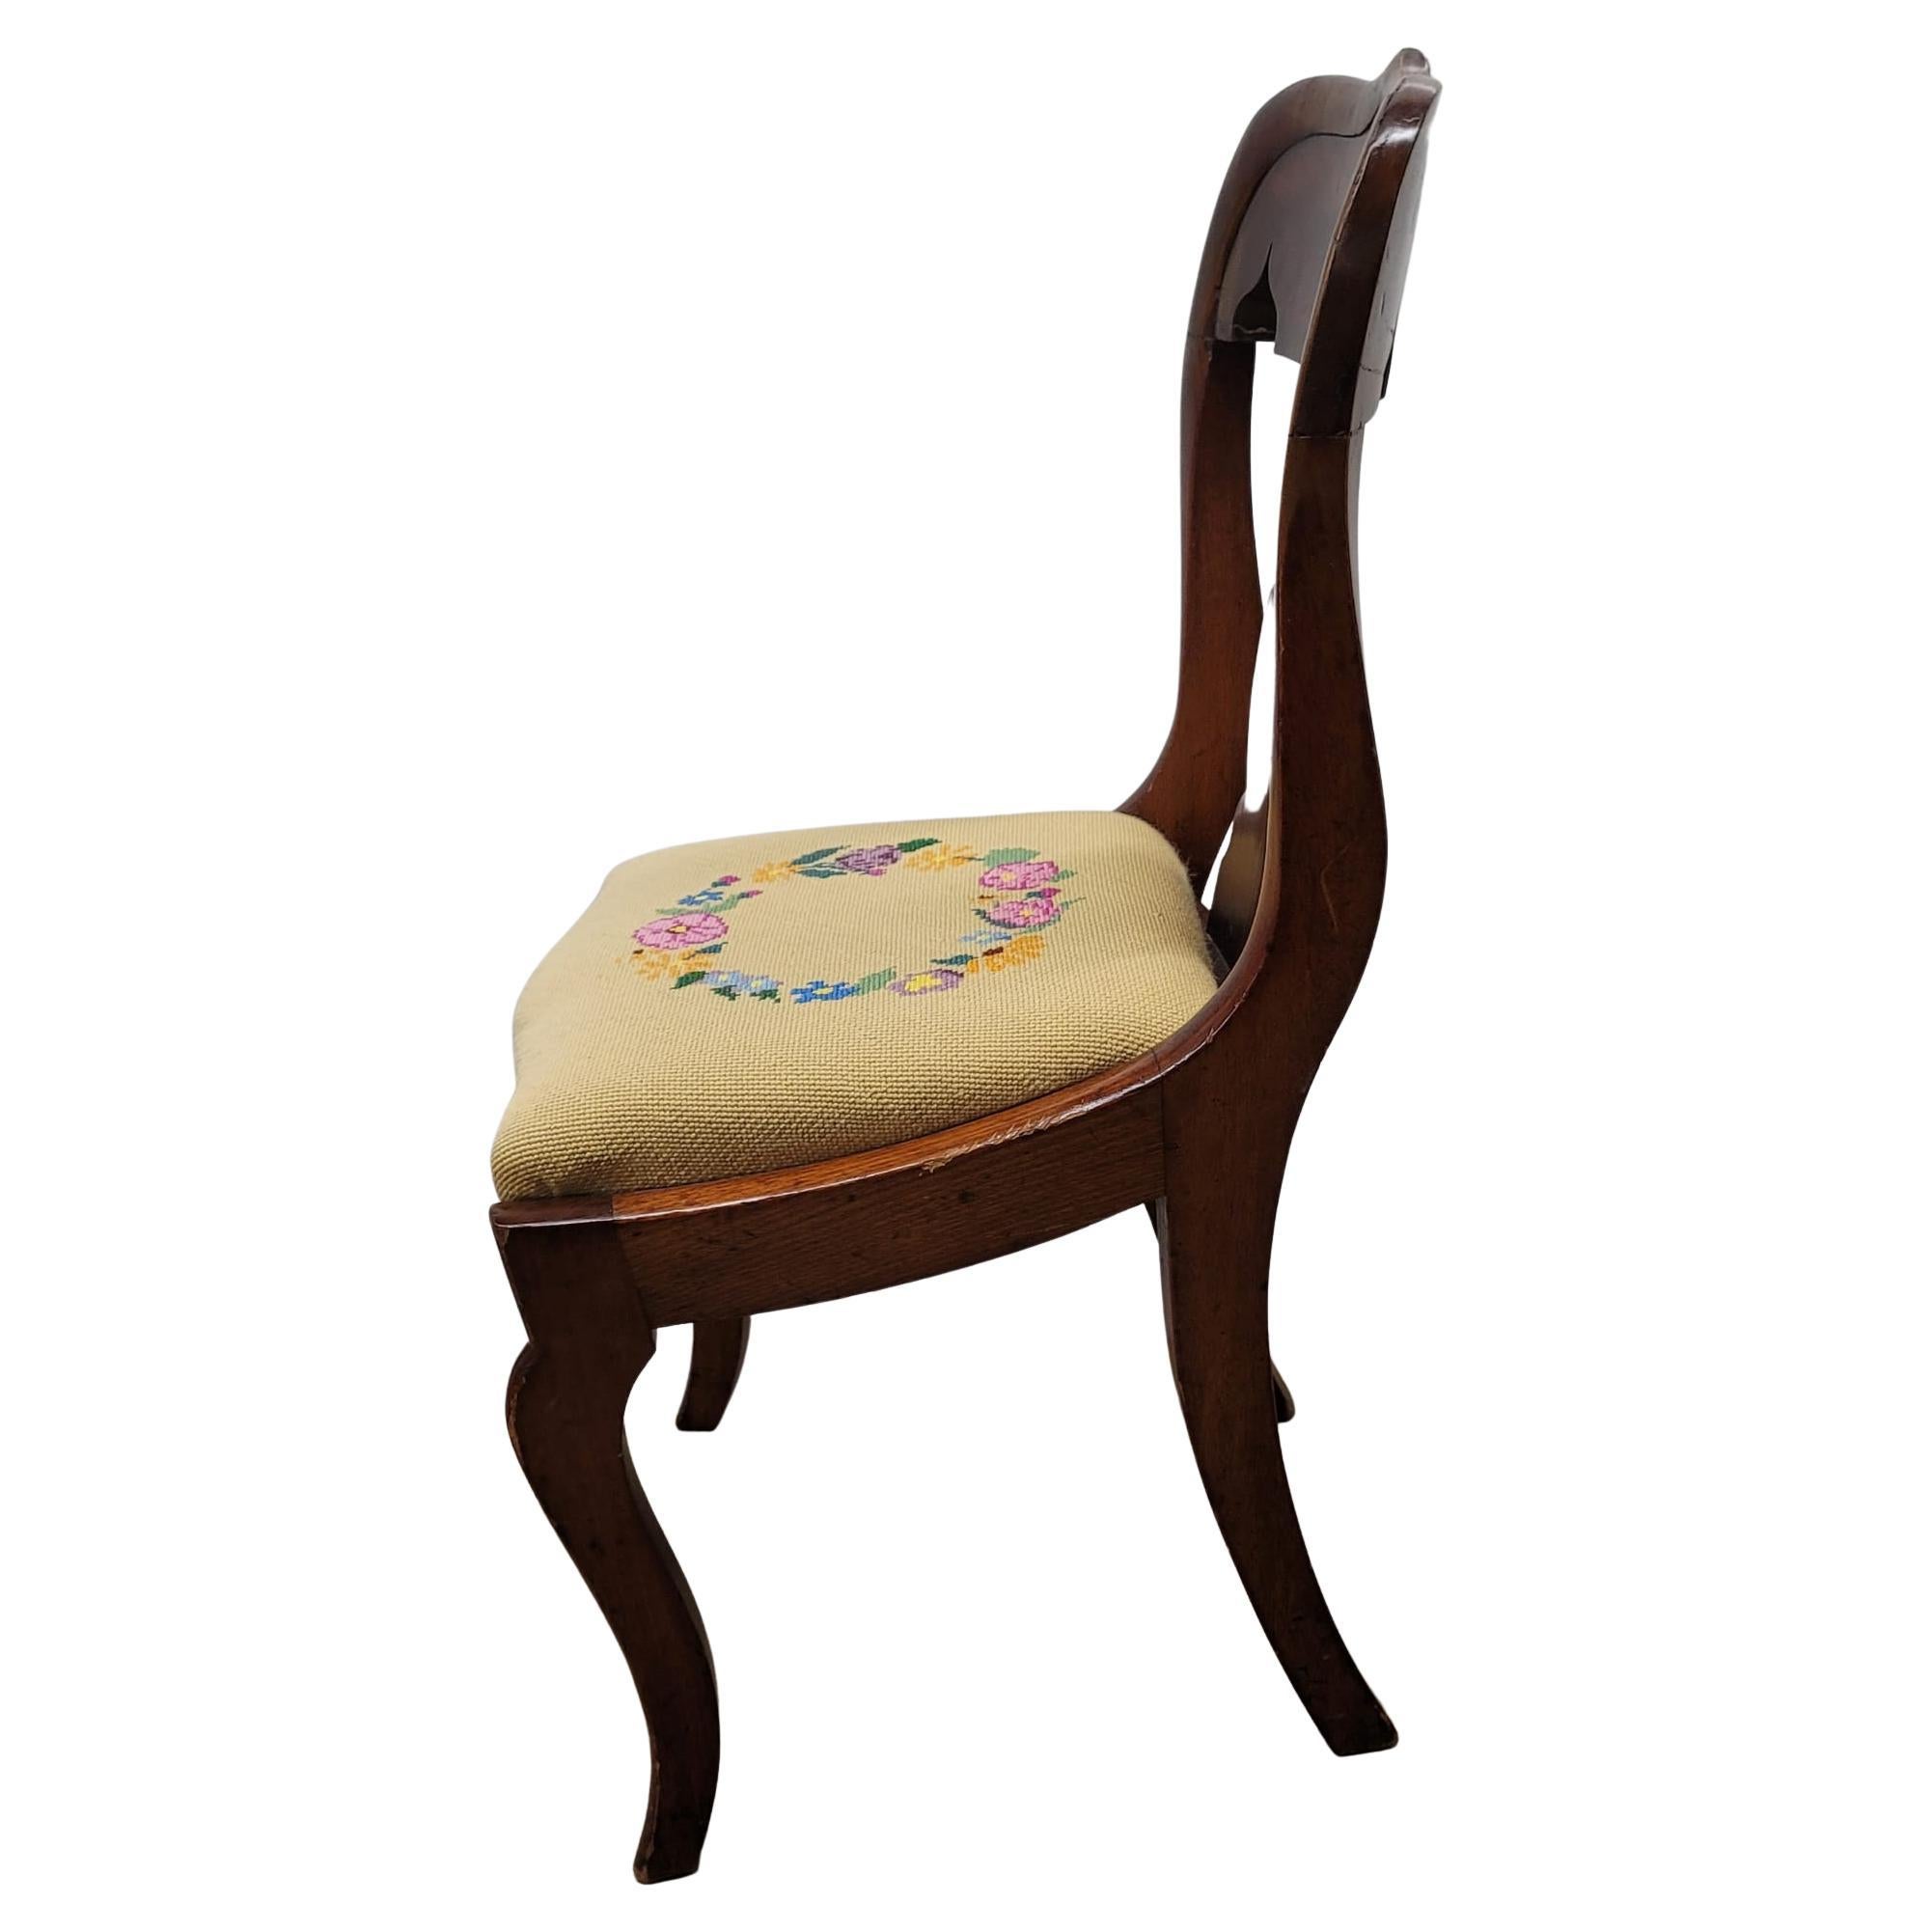 Recently needlepoint reupholstered American Empire mahogany side chair. 
Measures 19